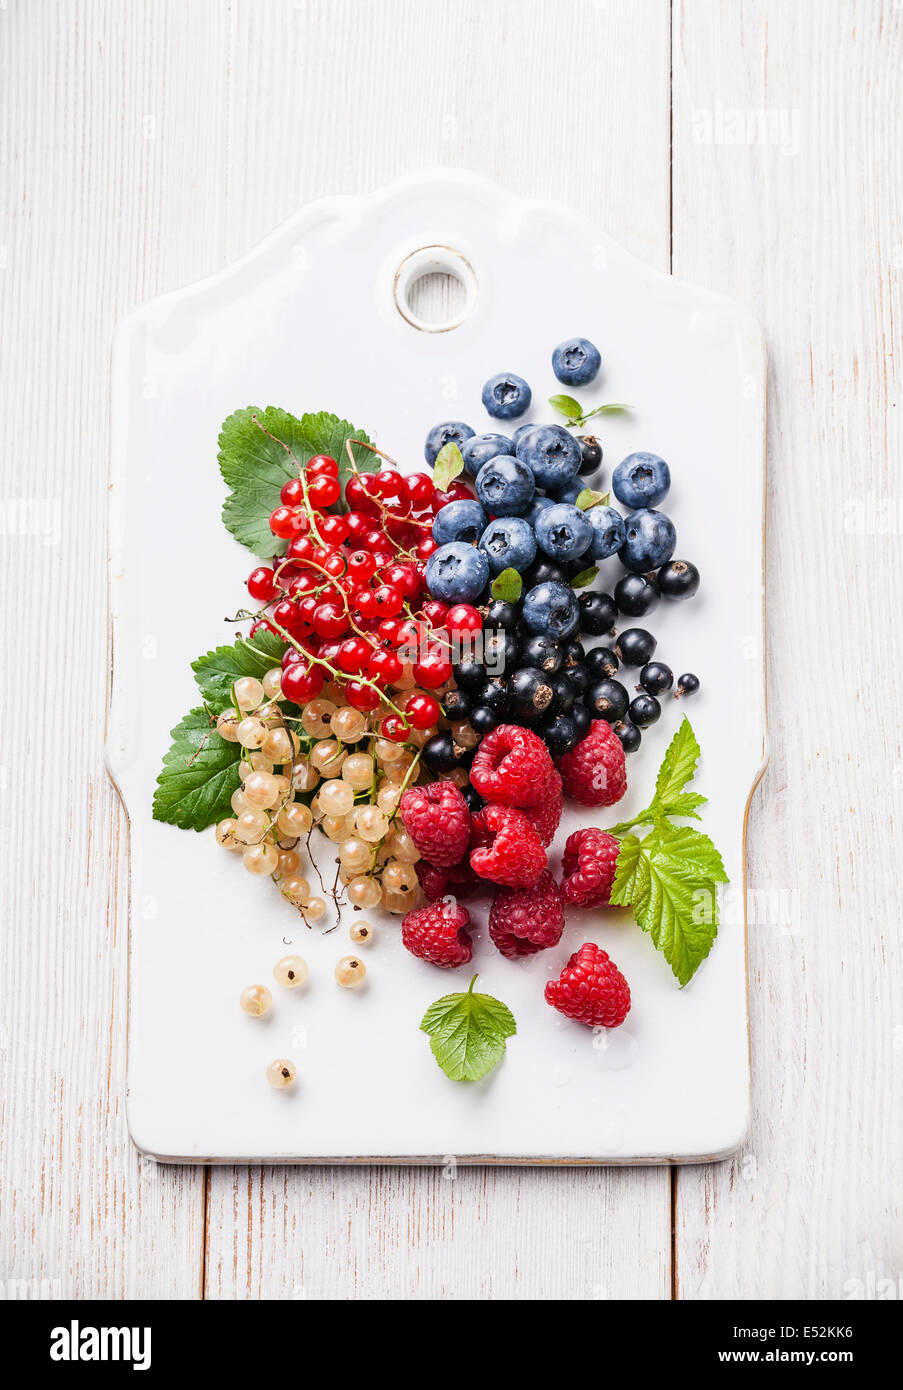 Mix of fresh berries with leaves on rustic wooden background Stock Photo